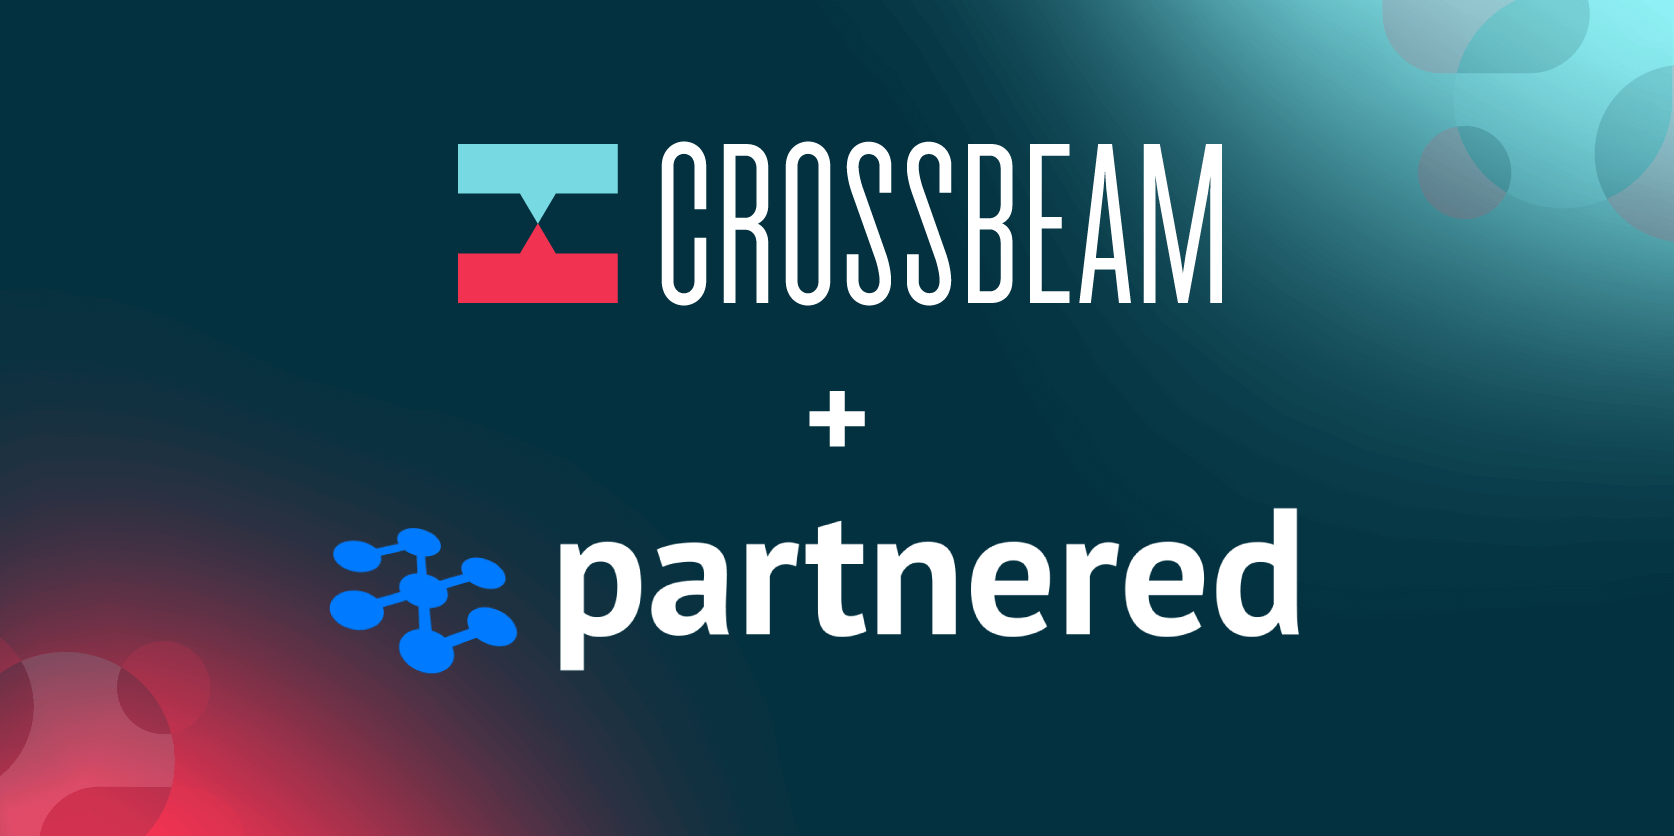 crossbeam-acquired-partnered-coselling